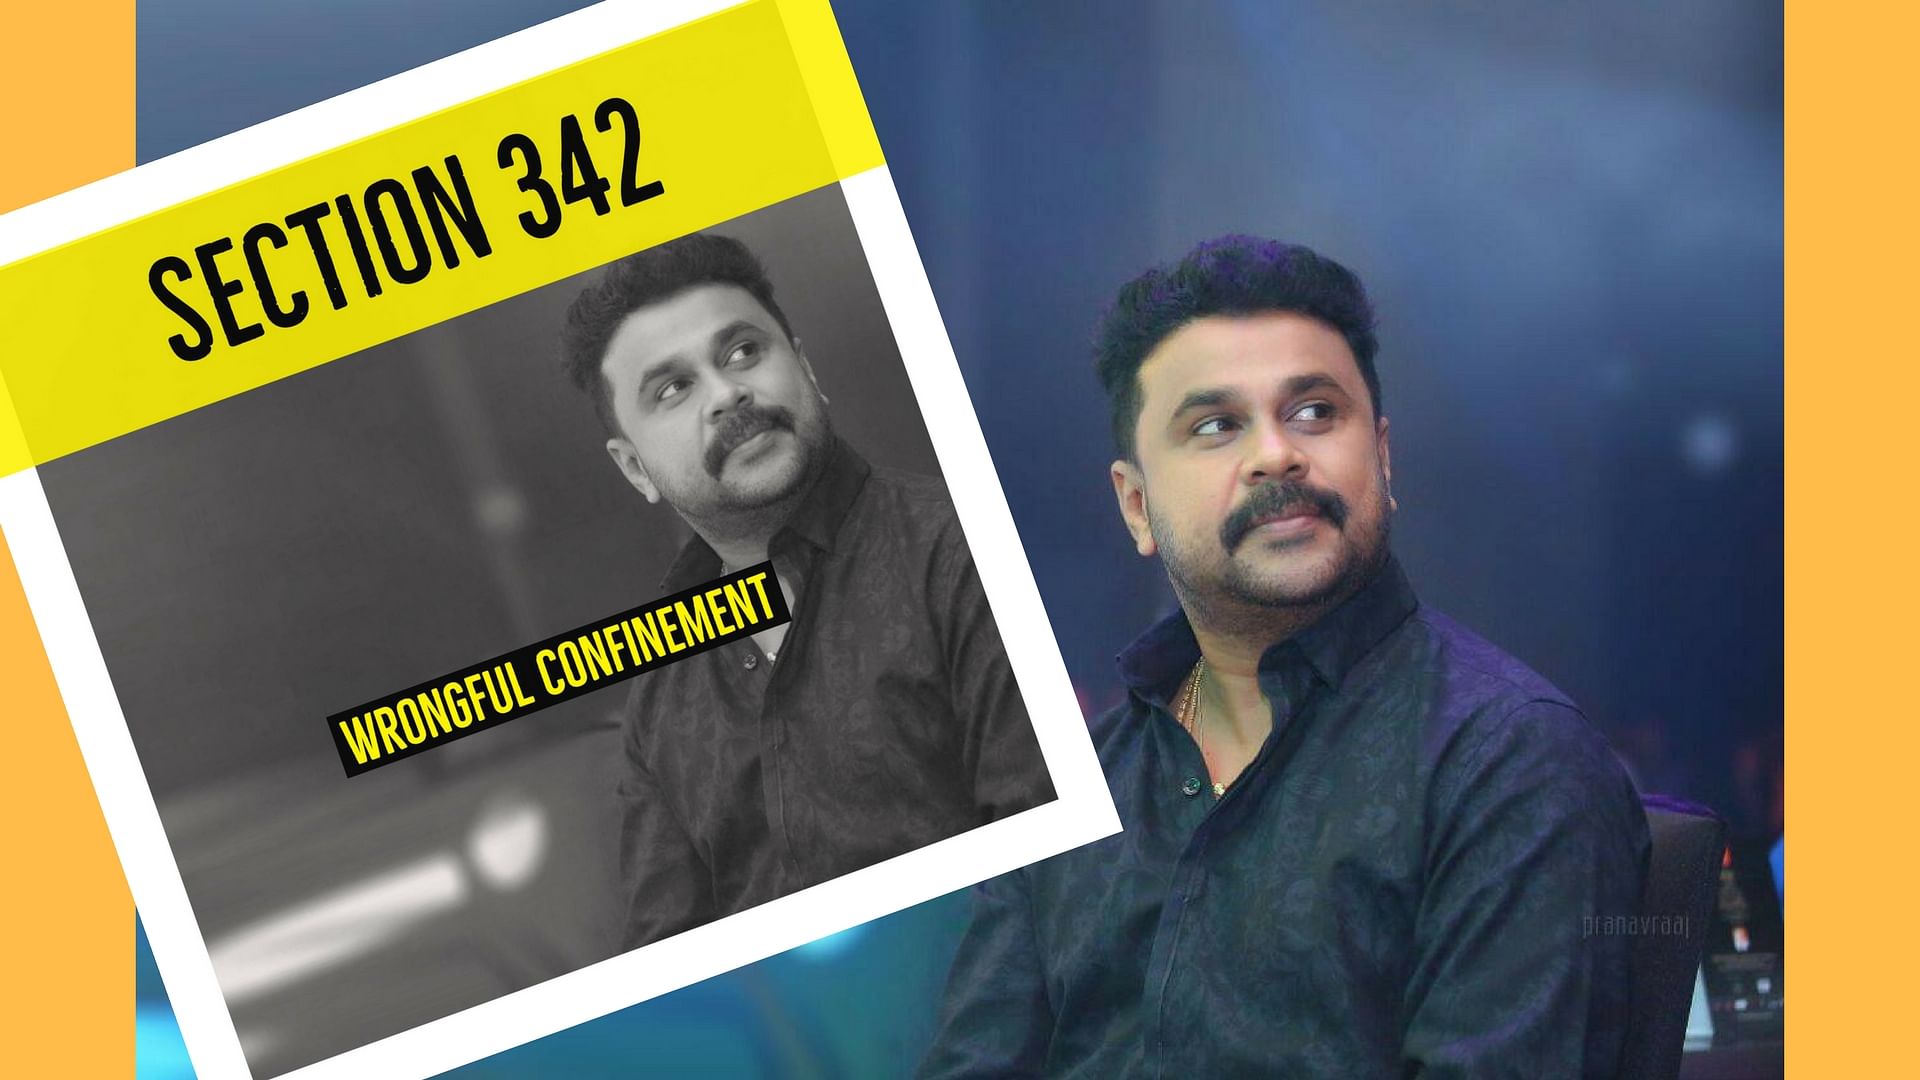 An overview of the charges against Malayalam actor Dileep in the actor abduction case.